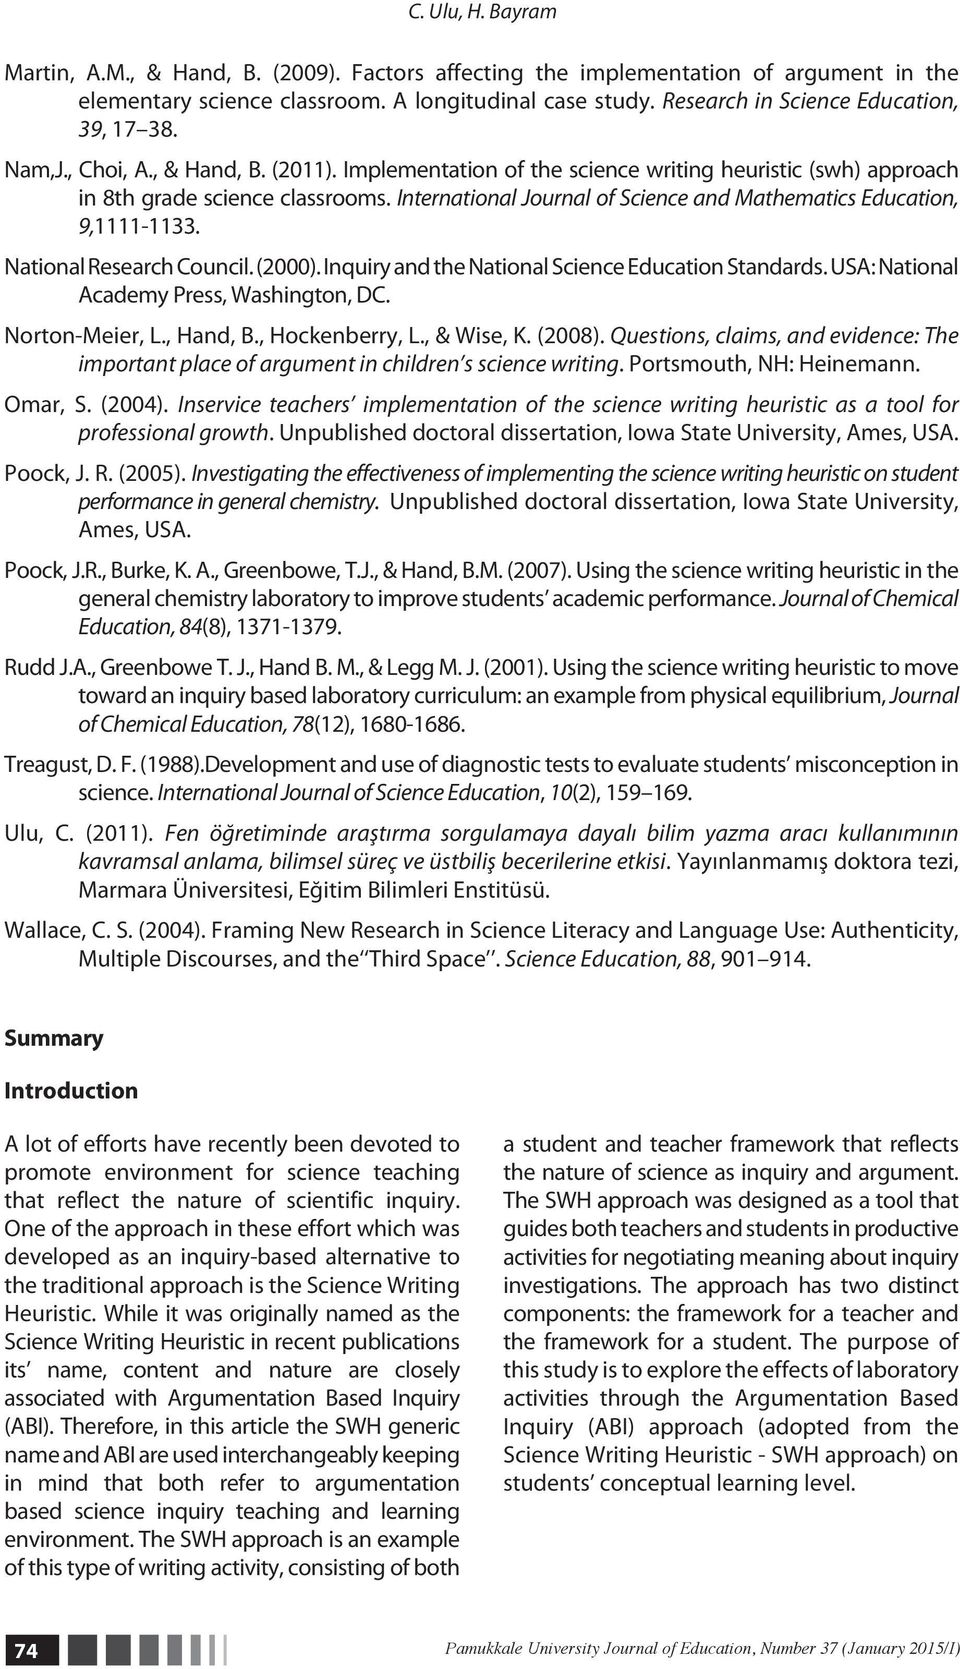 International Journal of Science and Mathematics Education, 9,1111-1133. National Research Council. (2000). Inquiry and the National Science Education Standards.